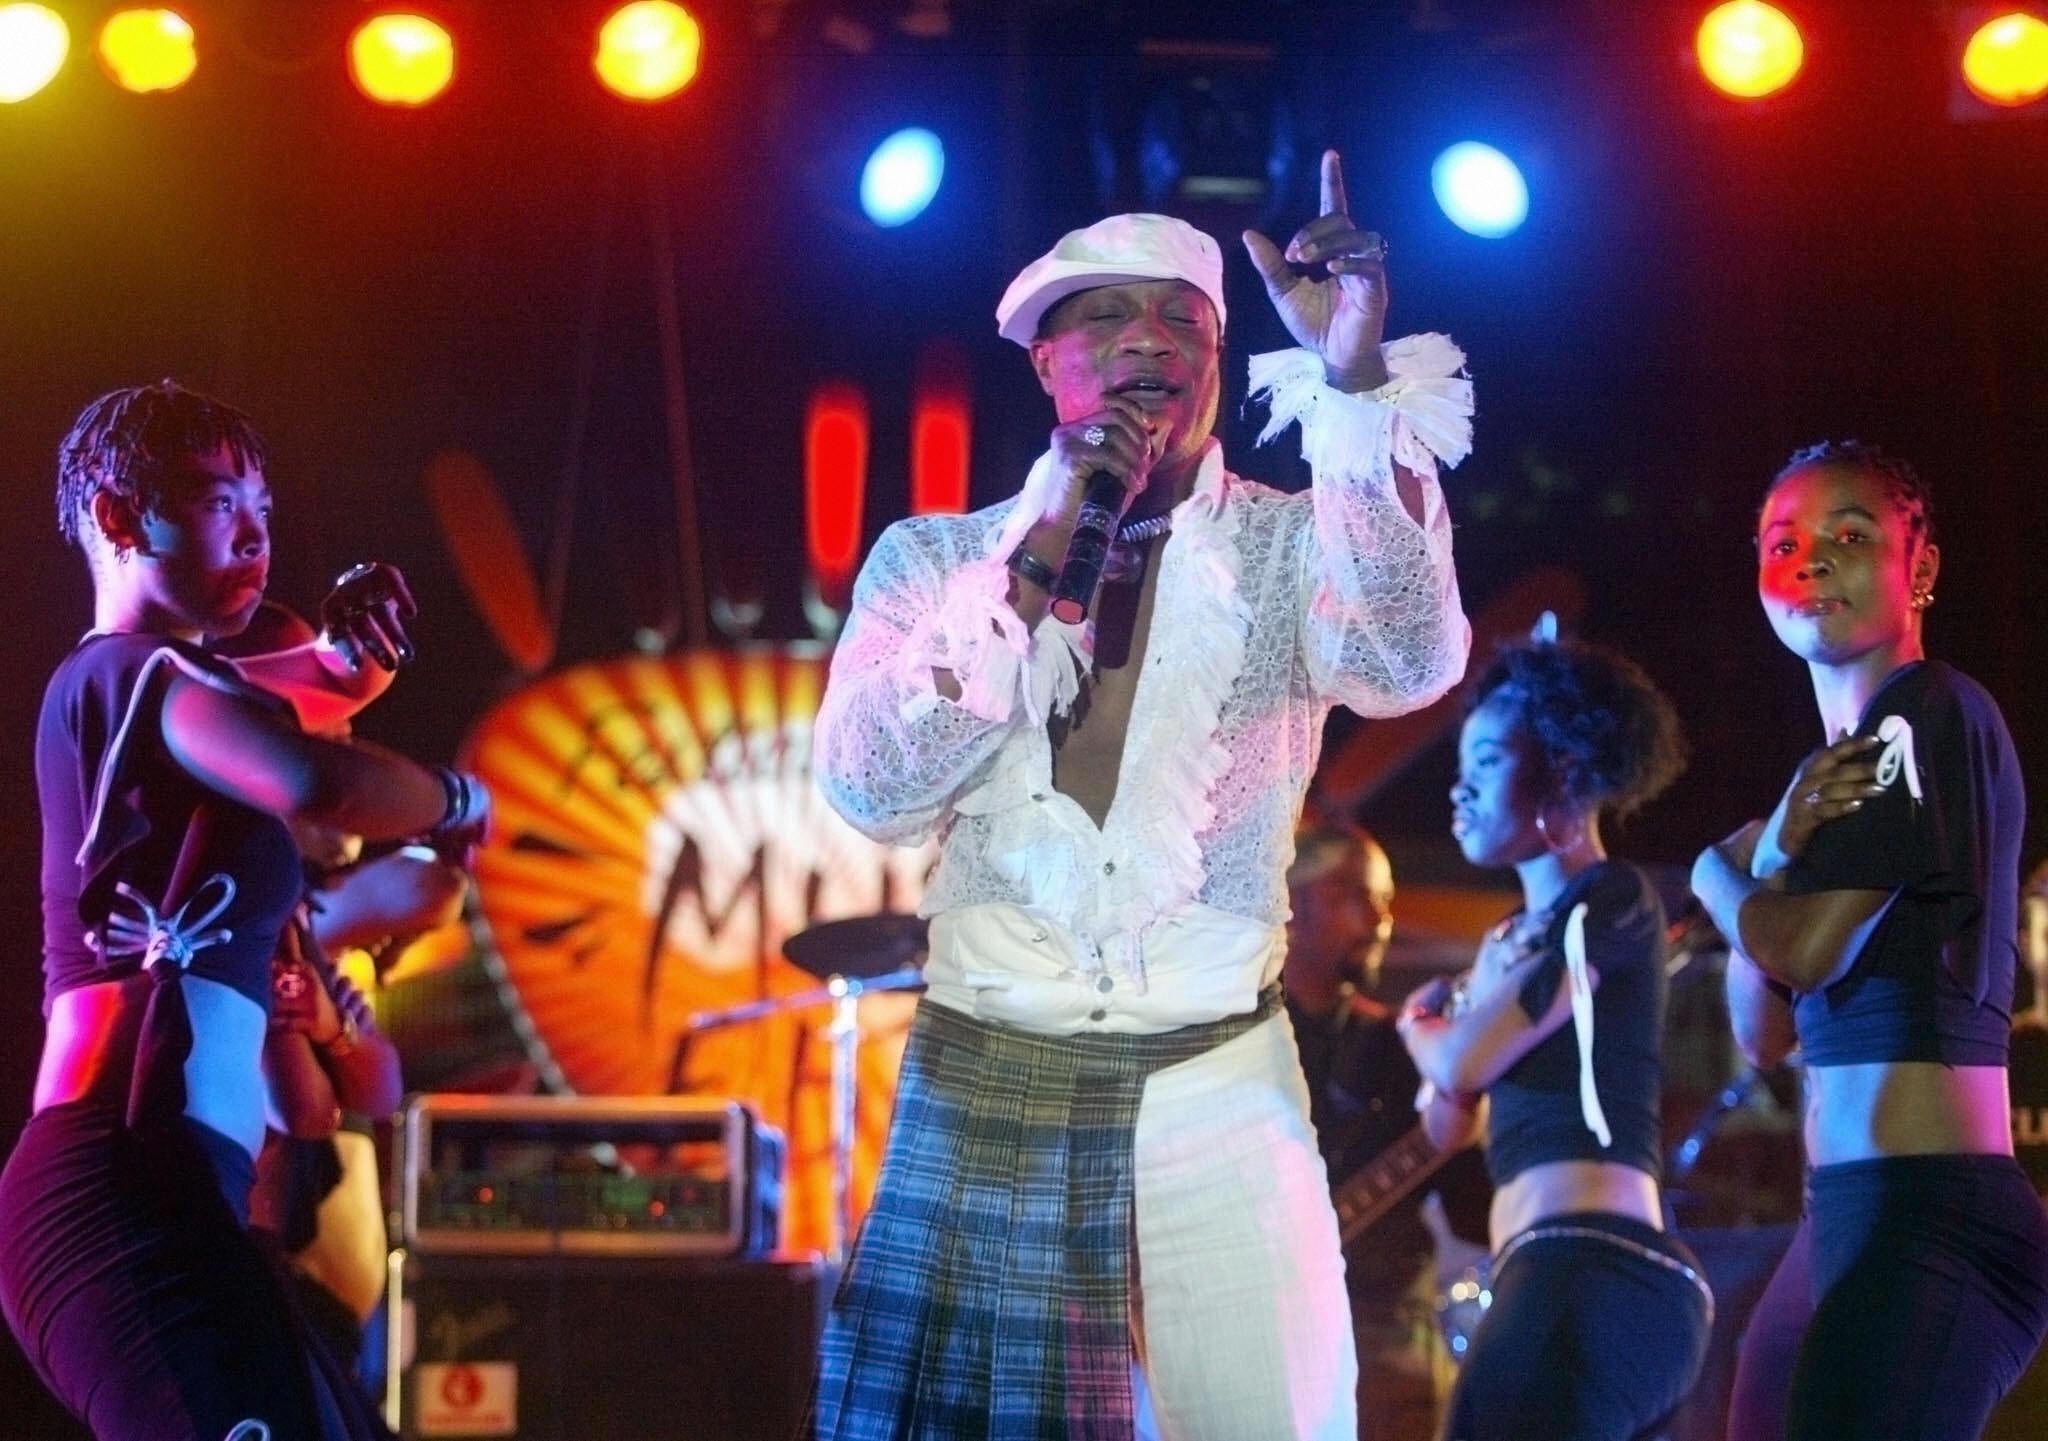 The soukous singer, who is massively popular across Africa, has had several gold records in his career